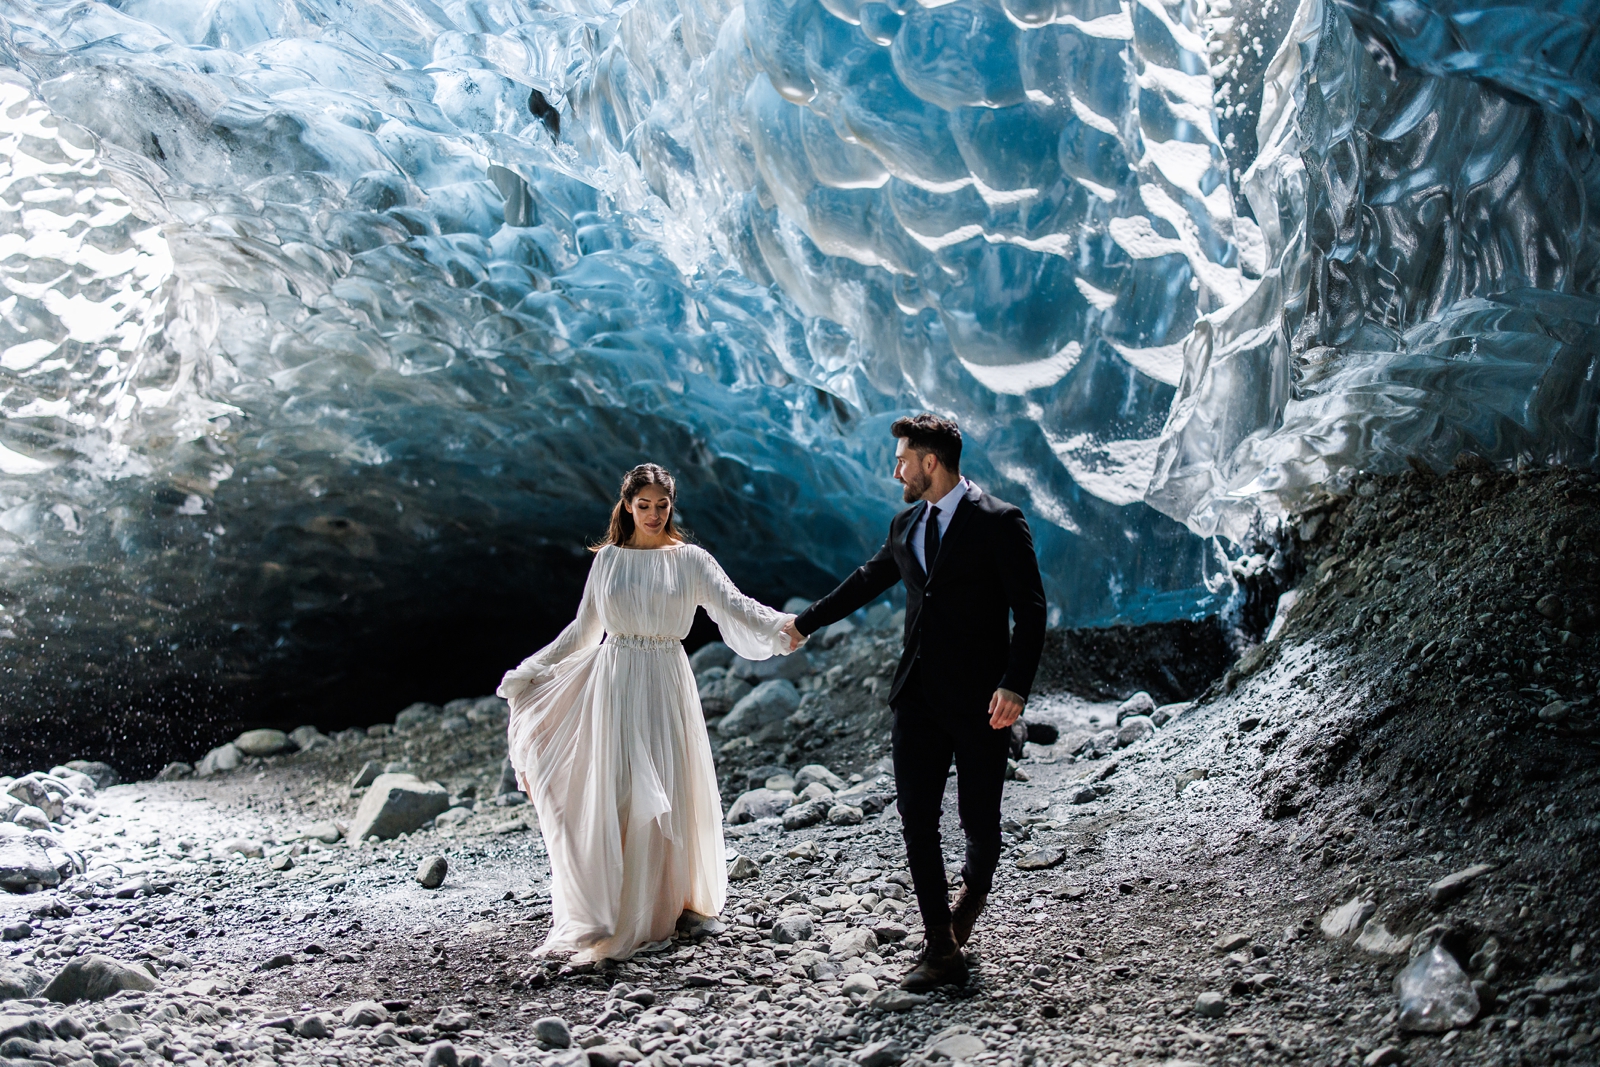 An eloping couple walking in an Iceland ice cave on their wedding day.